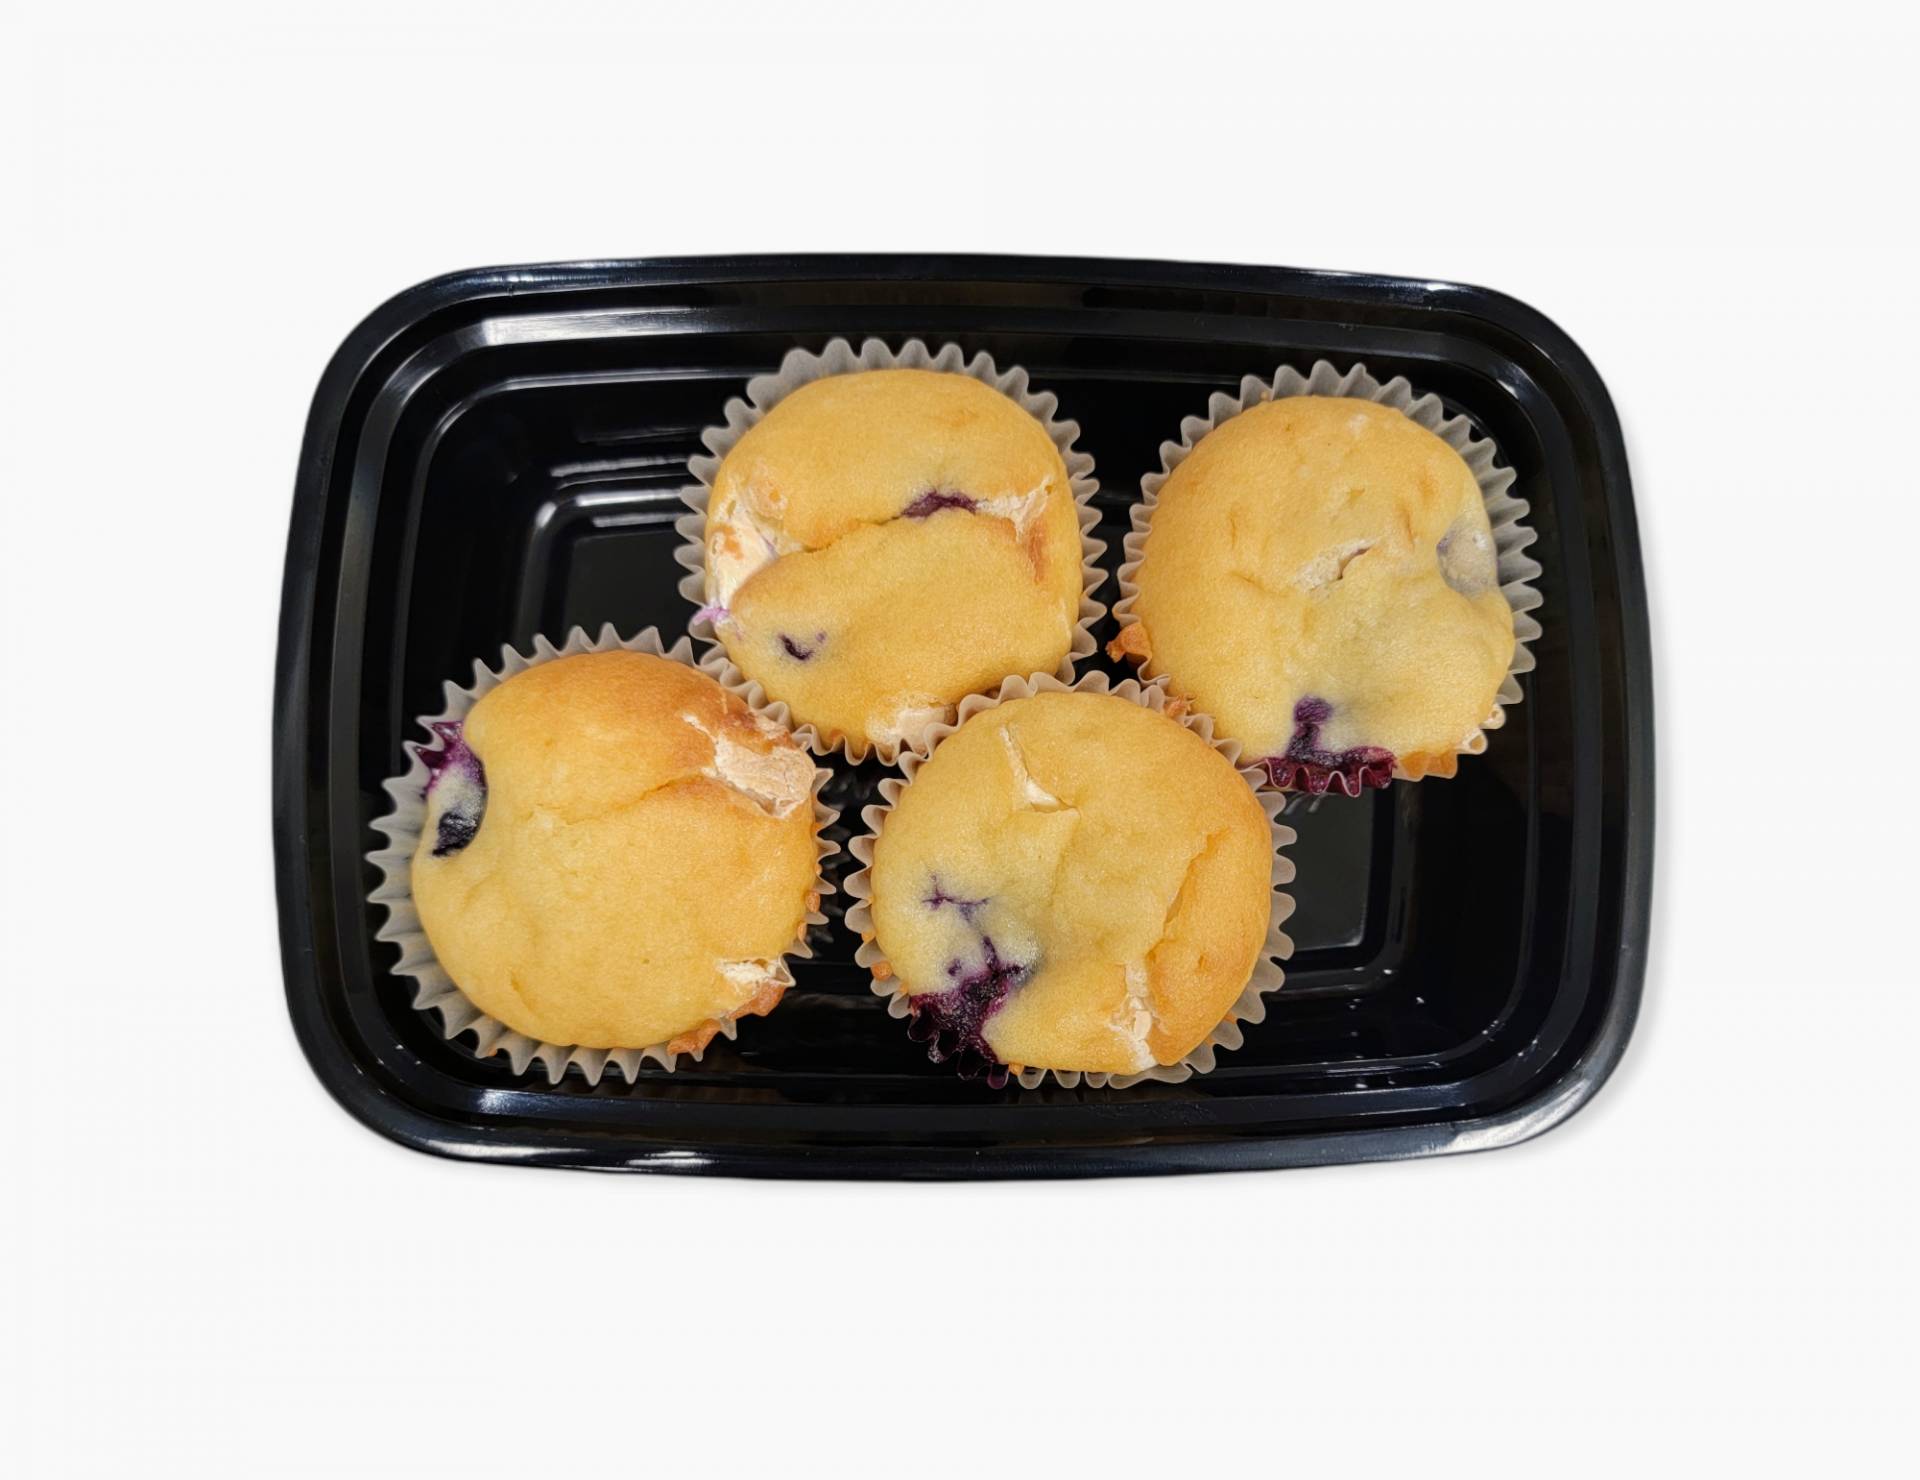 Blueberry Cheesecake Muffins- 2 pack